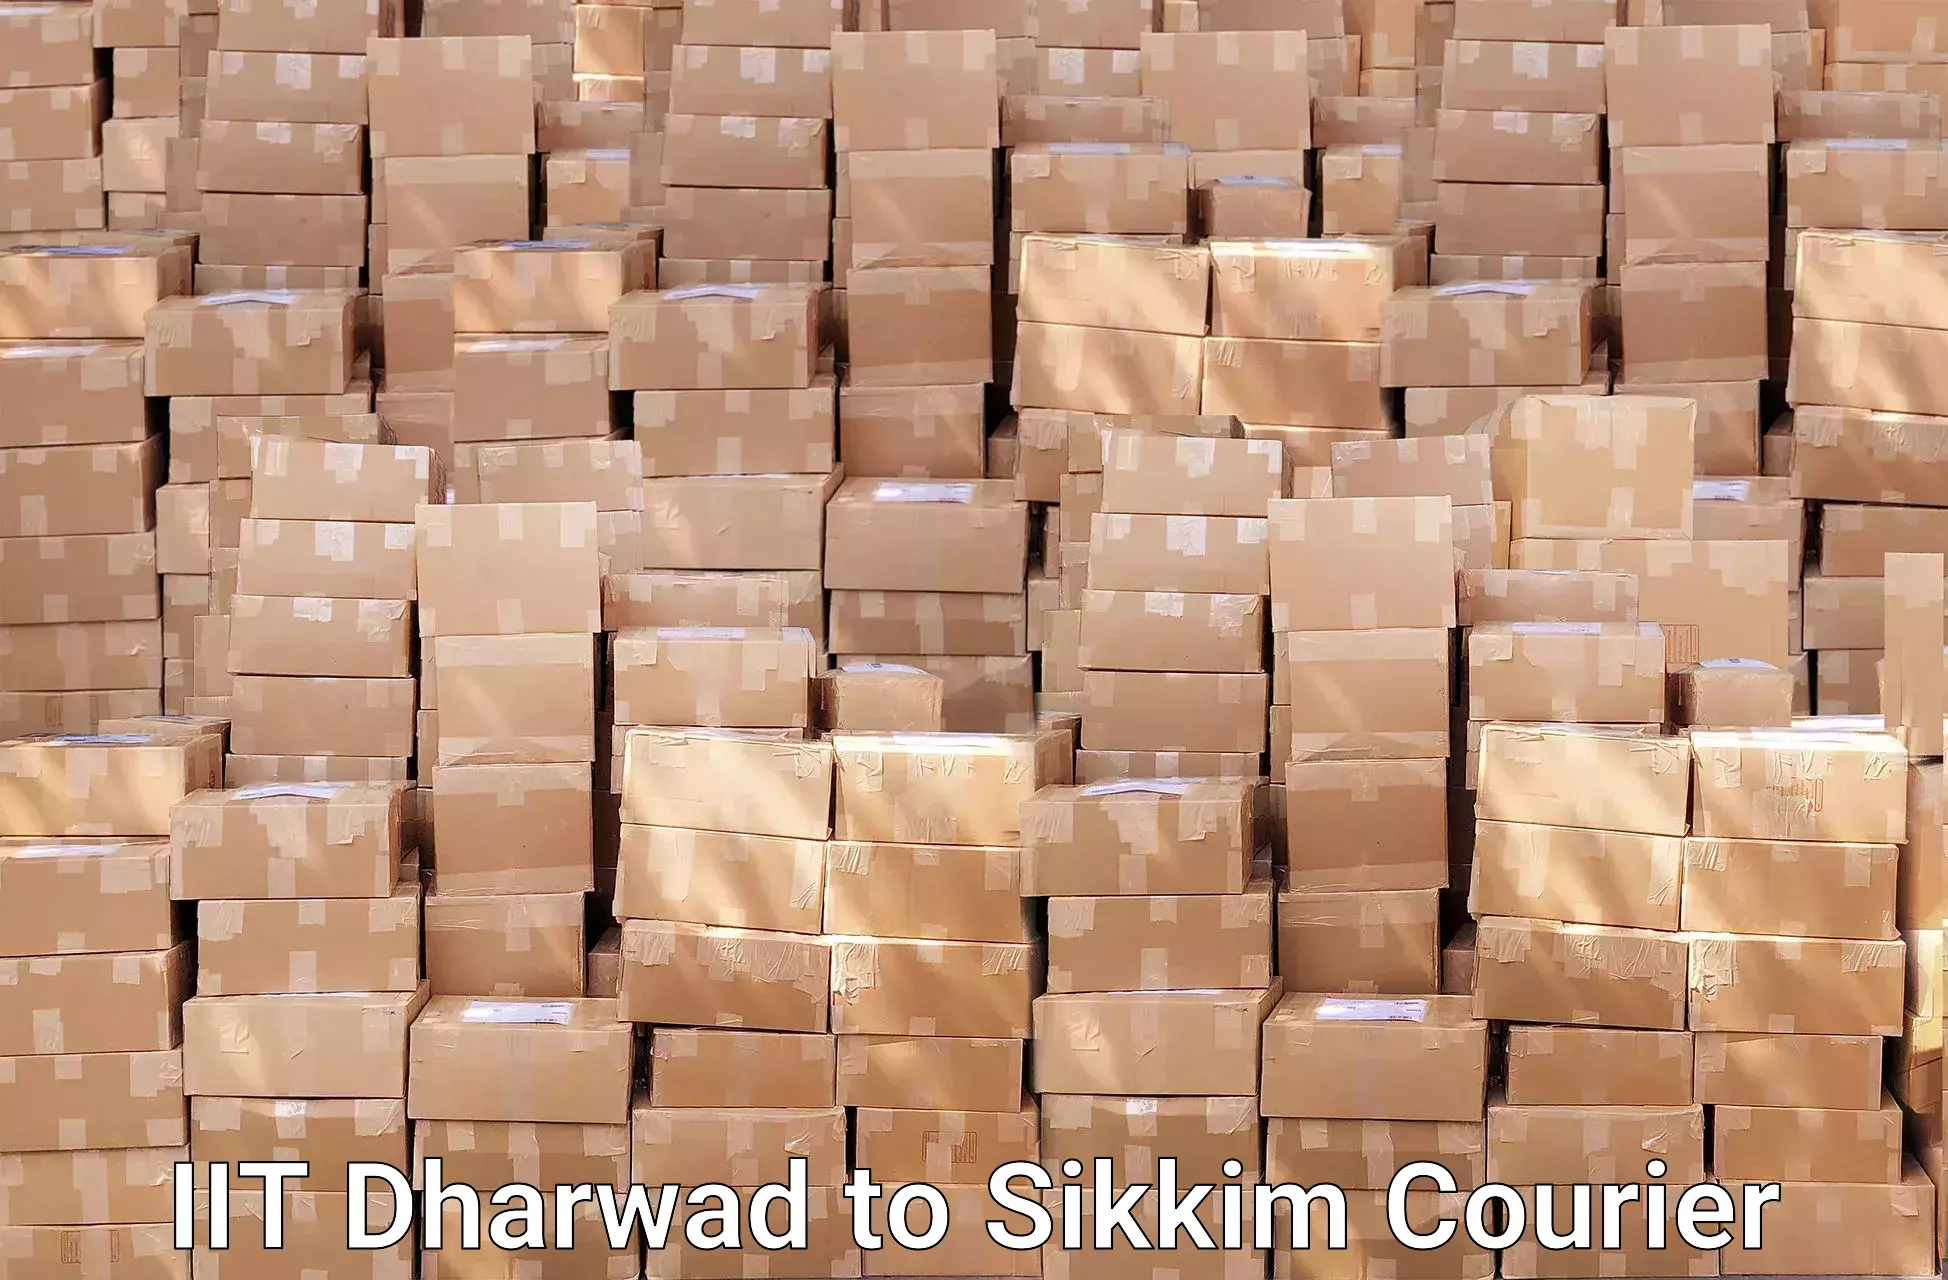 Quality moving company IIT Dharwad to Sikkim